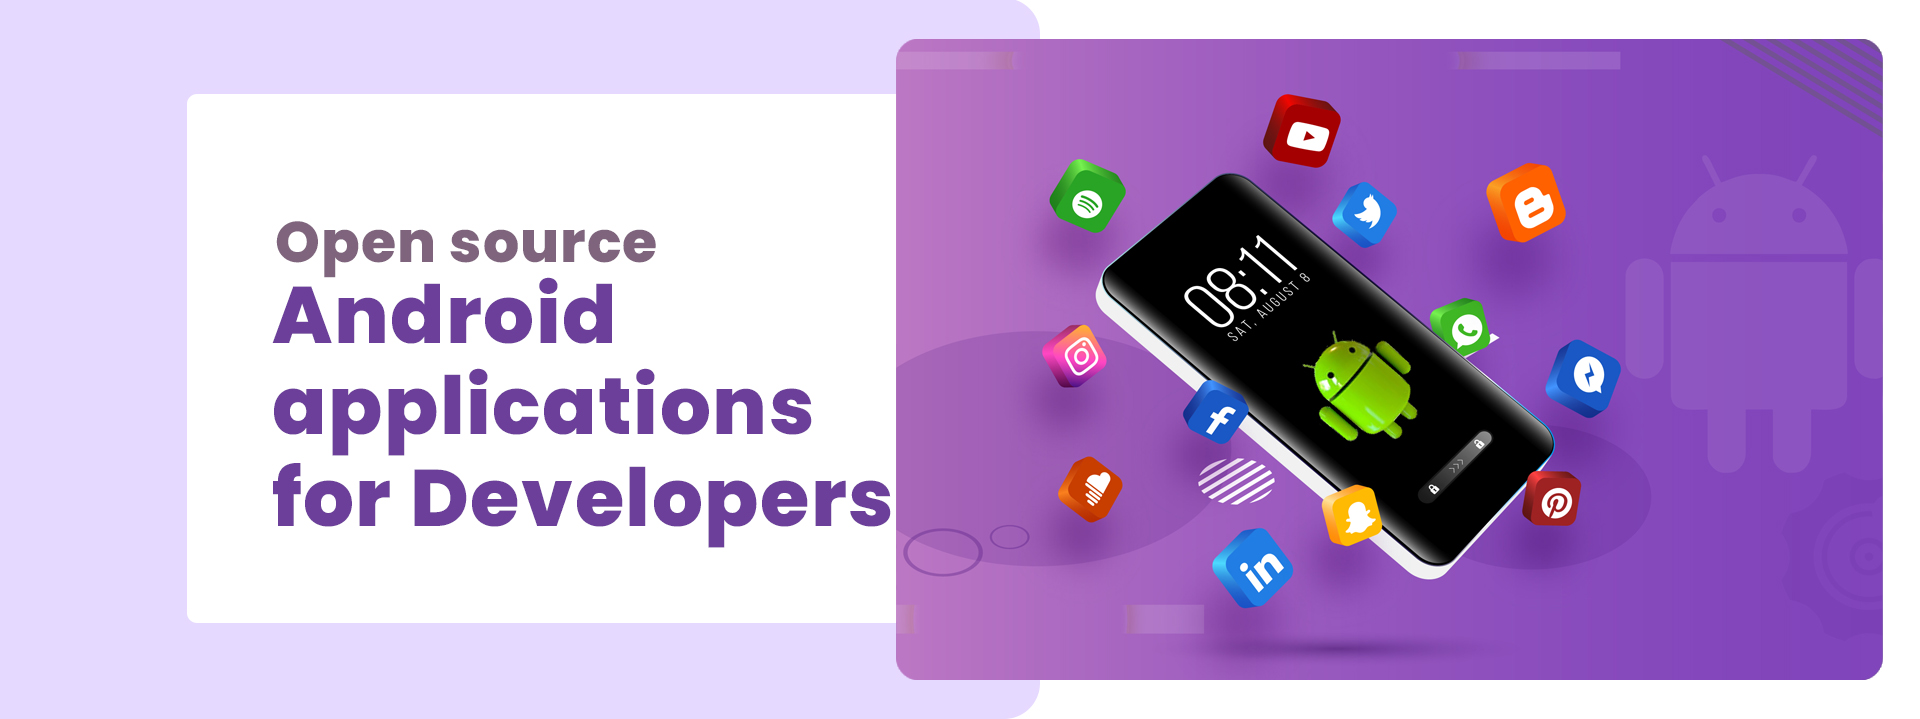 Best open source android applications for developers - Blog - Netmaxims